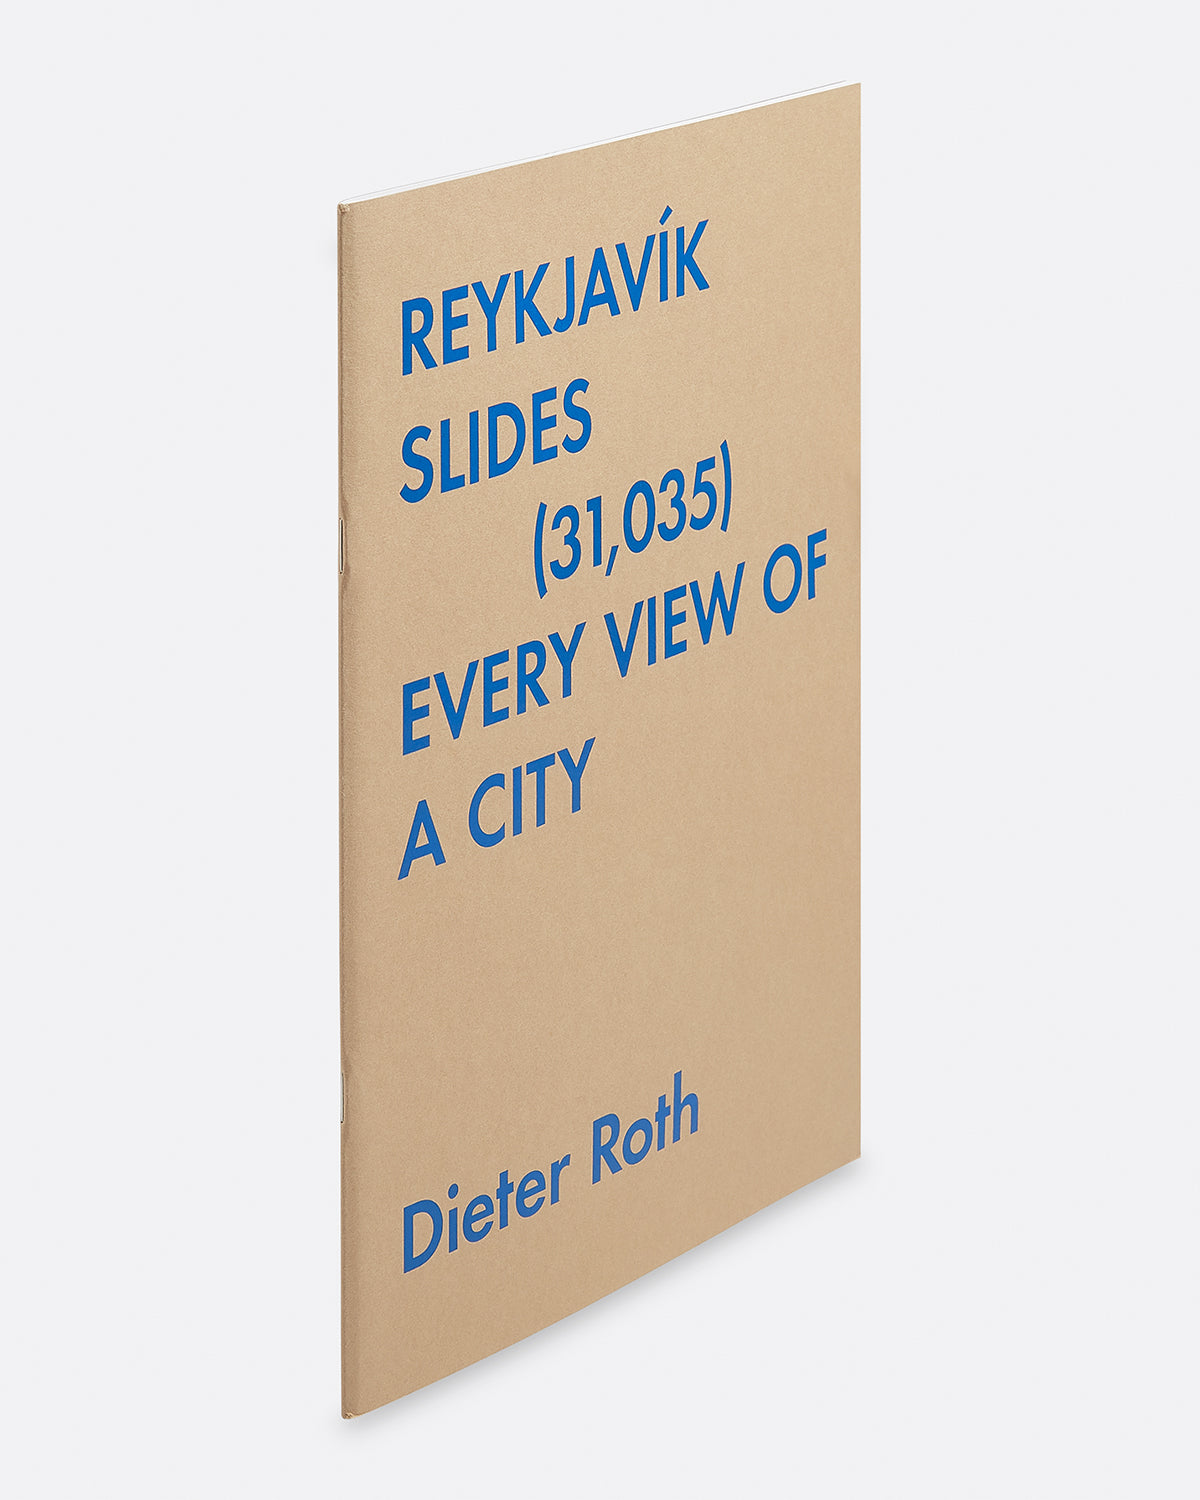 Dieter Roth: Reykjavik Slides (31,035) Every View of a City Default Title